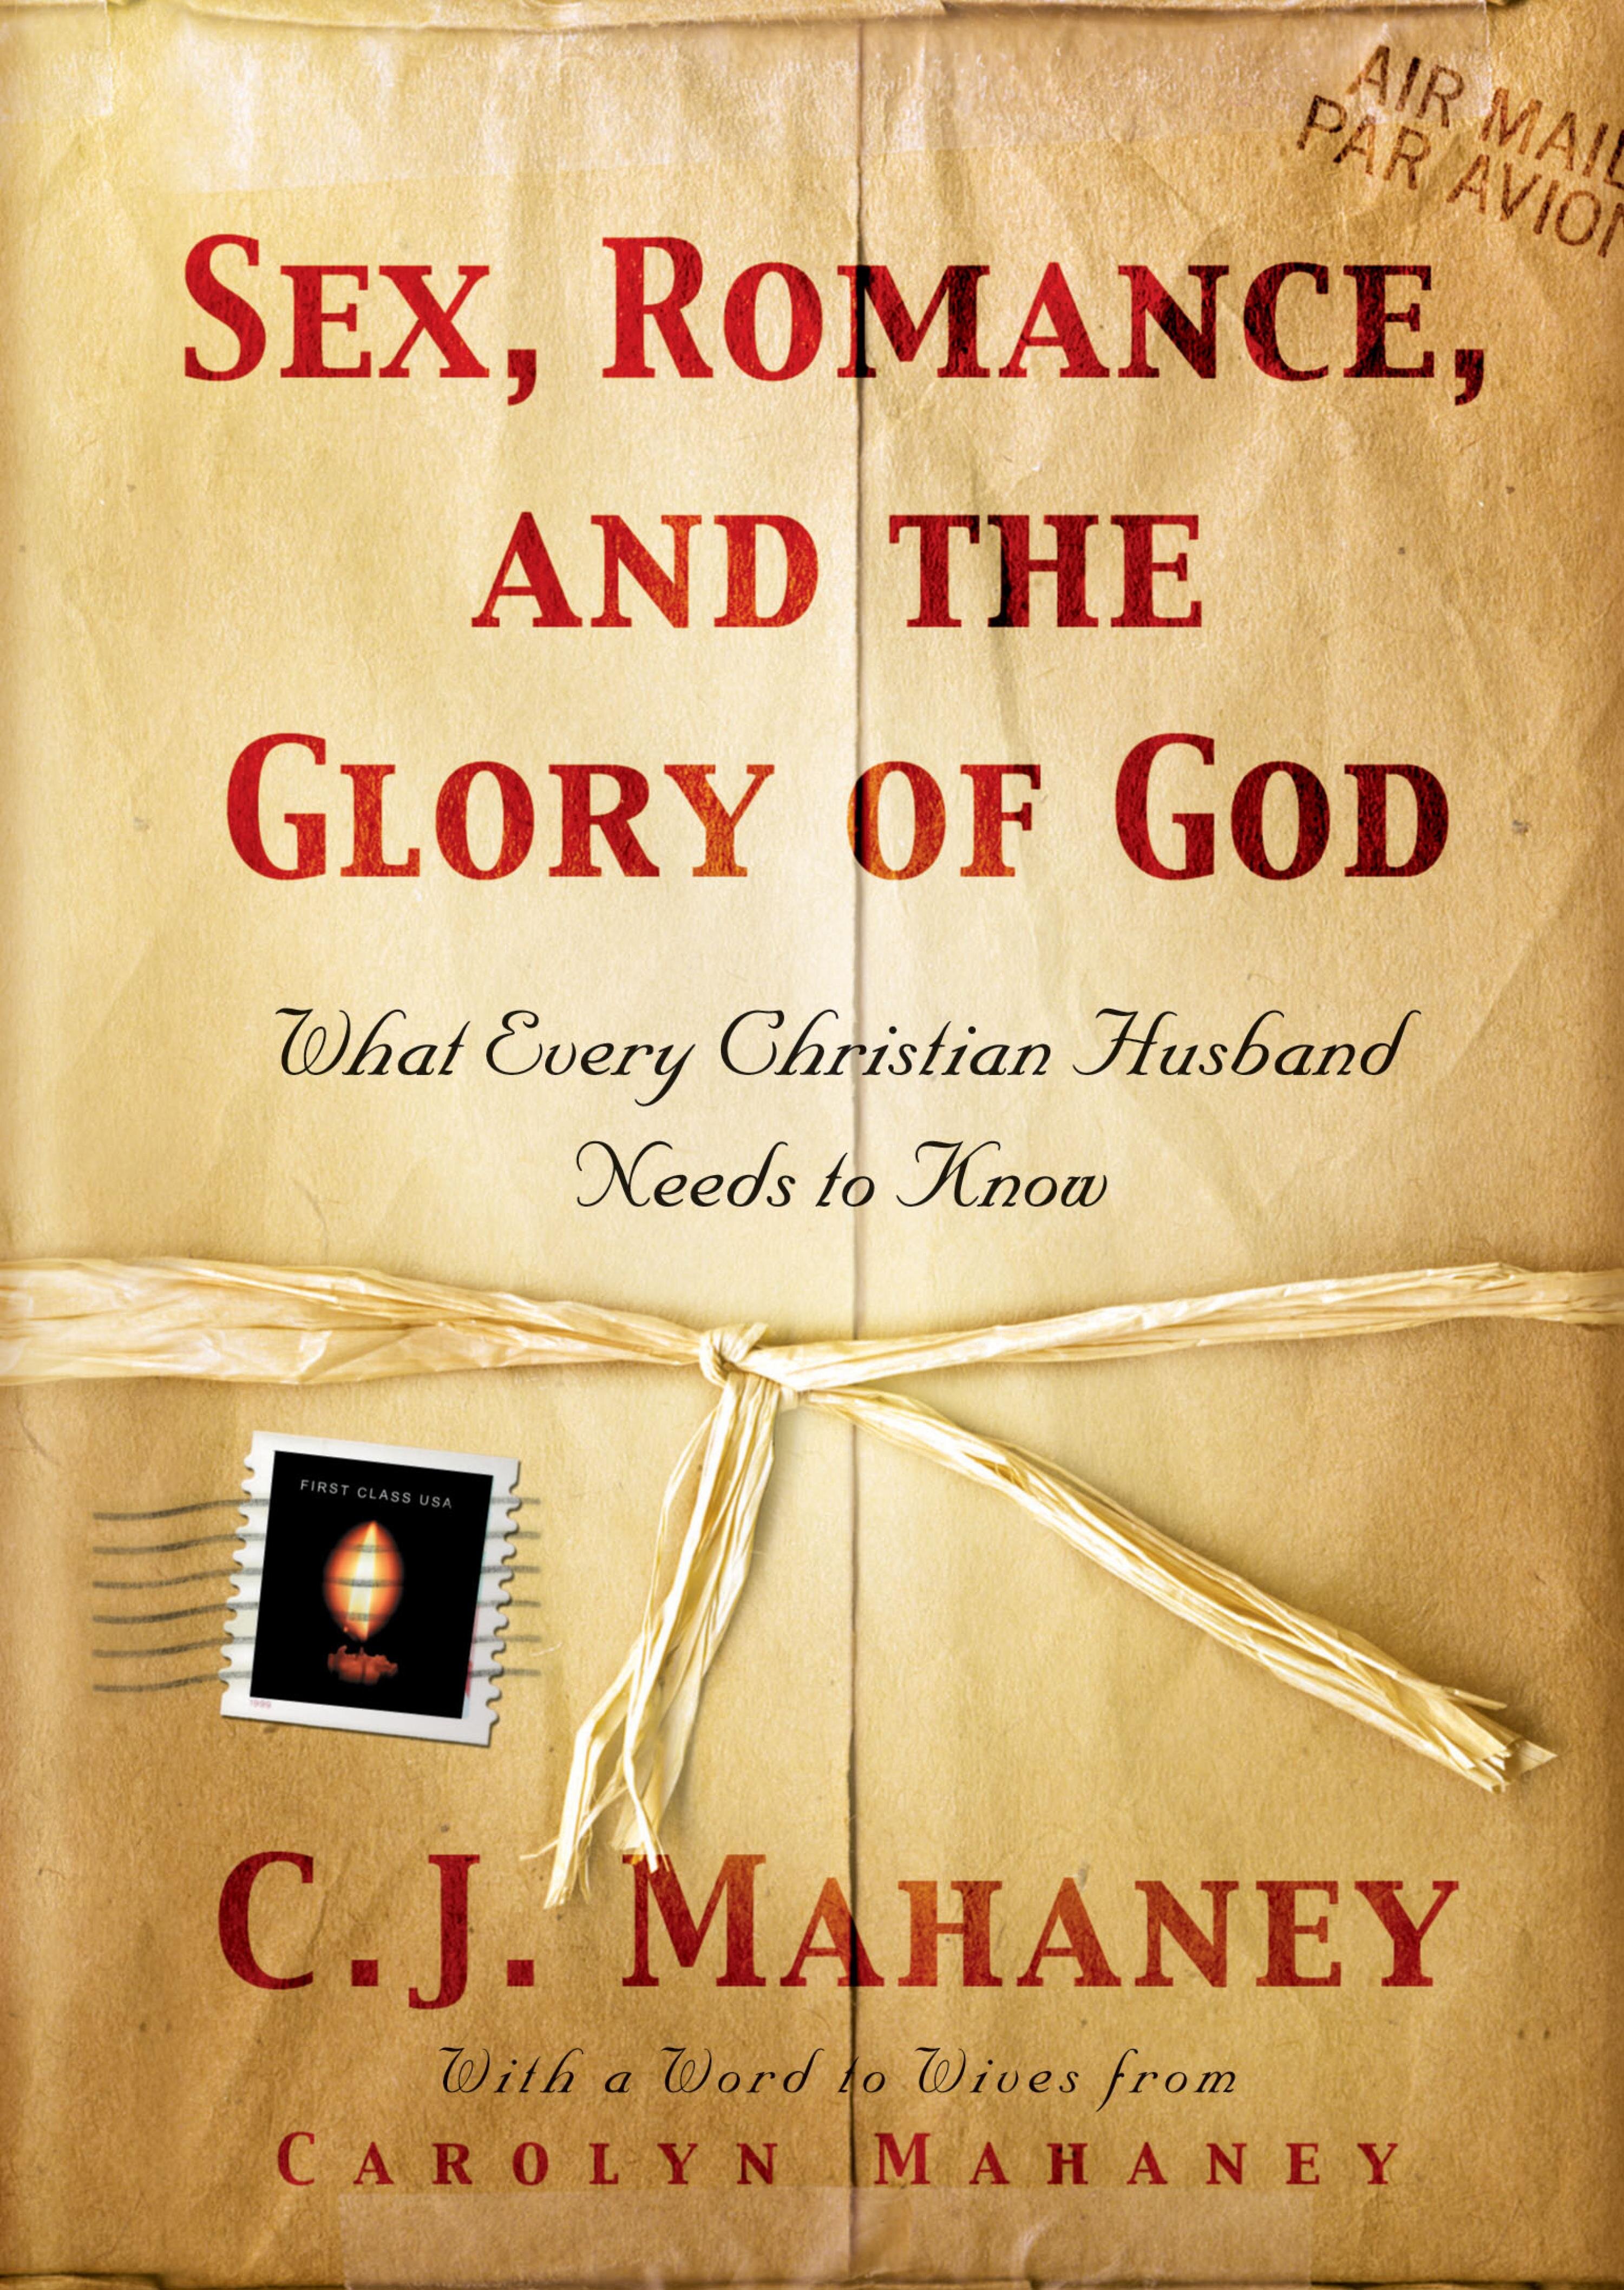 Sex, Romance, and the Glory of God (With a word to wives from Carolyn Mahaney) What Every Christian Husband Needs to Know Faithlife Ebooks pic